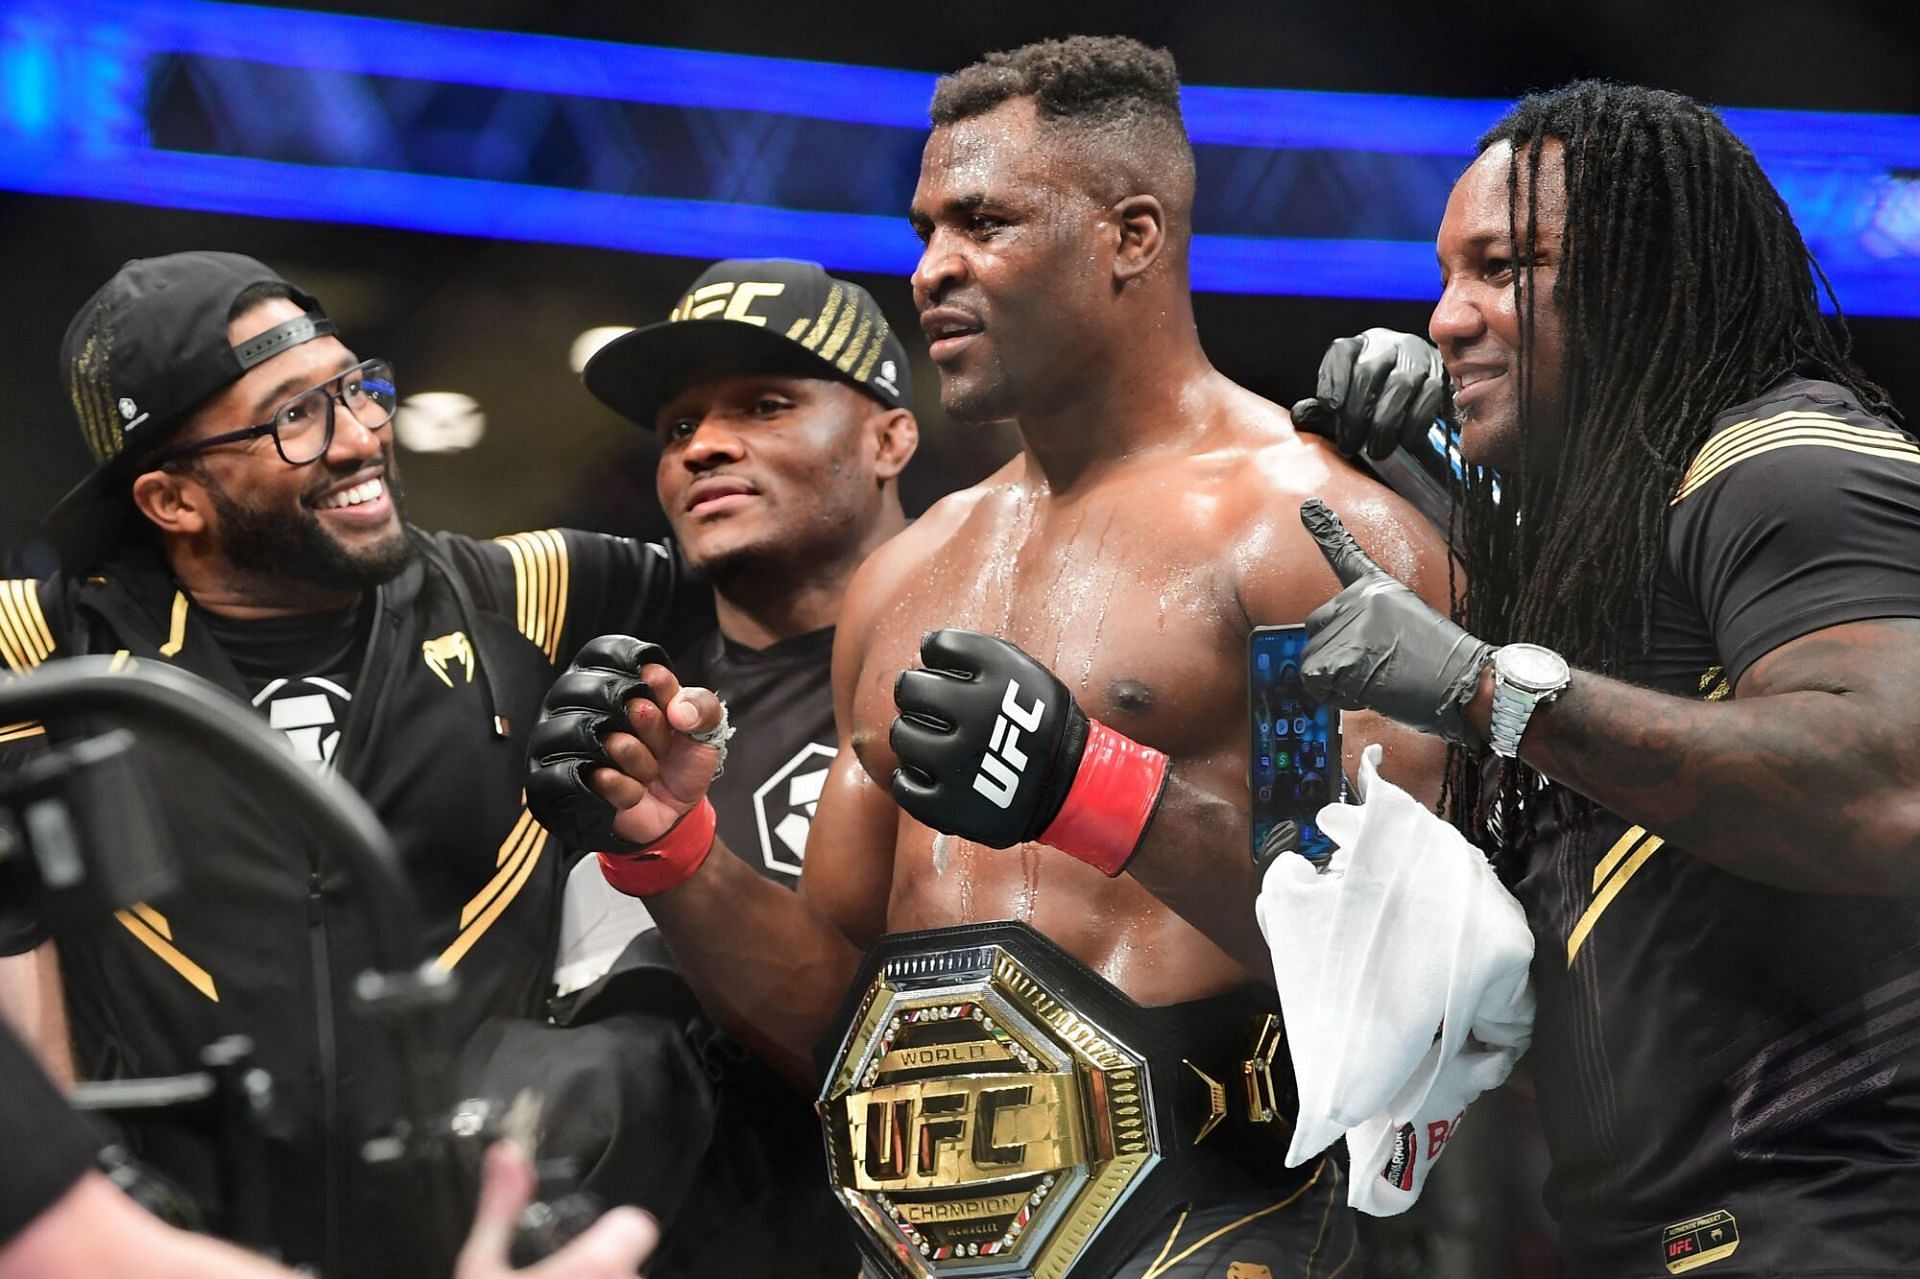 Francis Ngannou was victorious at UFC 270